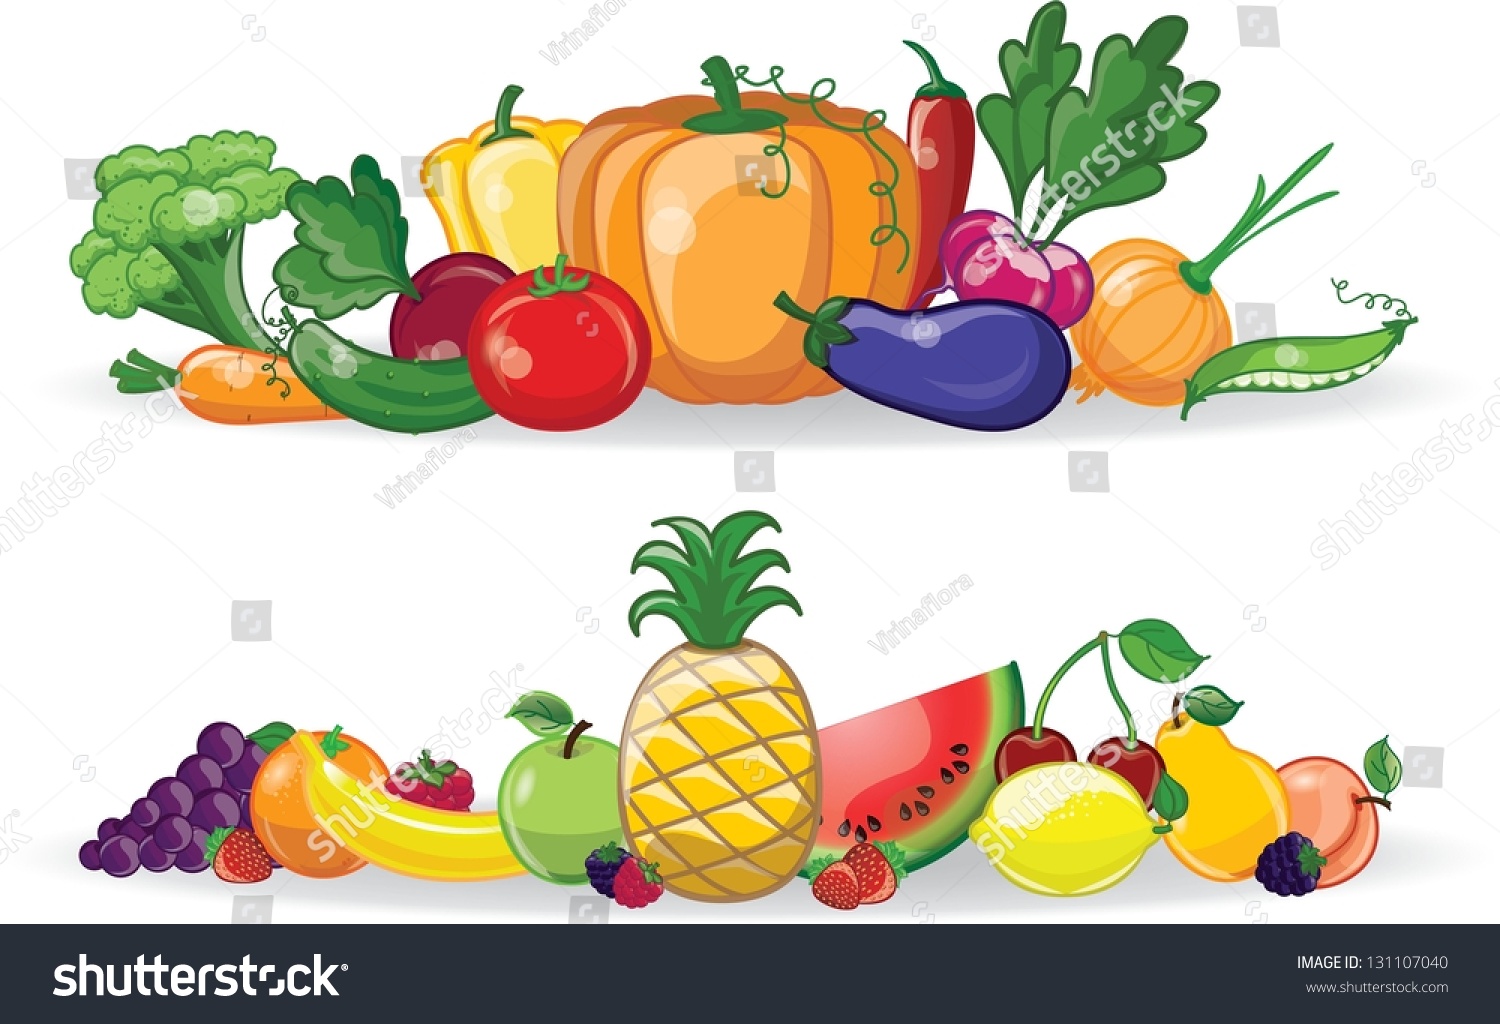 animated vegetables clipart - photo #48